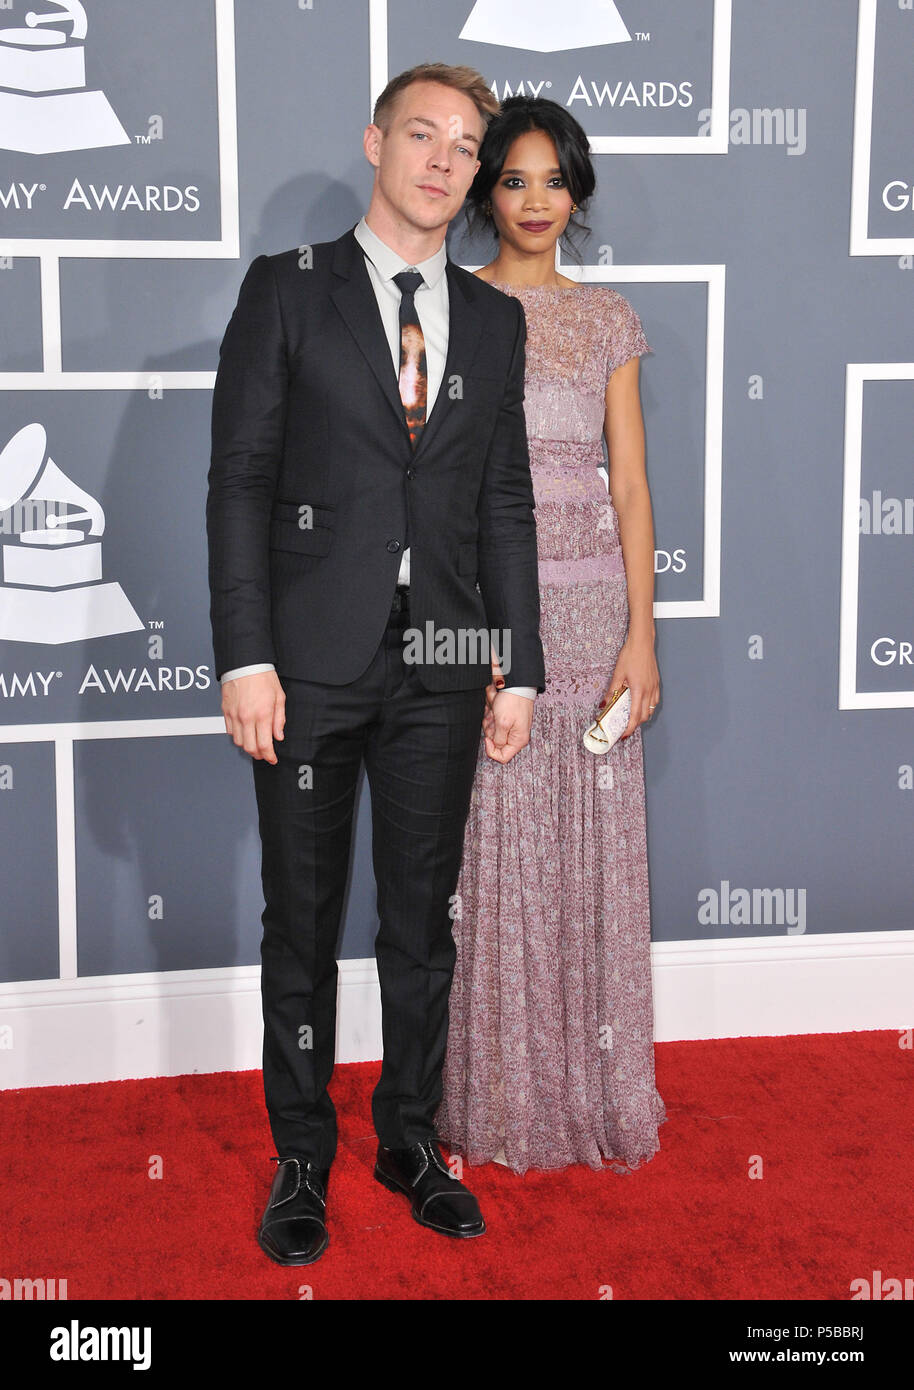 Diplo   at  the 55th Ann. Grammy Awards 2013 at the Staples Center in Los Angeles.Diplo   ------------- Red Carpet Event, Vertical, USA, Film Industry, Celebrities,  Photography, Bestof, Arts Culture and Entertainment, Topix Celebrities fashion /  Vertical, Best of, Event in Hollywood Life - California,  Red Carpet and backstage, USA, Film Industry, Celebrities,  movie celebrities, TV celebrities, Music celebrities, Photography, Bestof, Arts Culture and Entertainment,  Topix, vertical,  family from from the year , 2013, inquiry tsuni@Gamma-USA.com Husband and wife Stock Photo